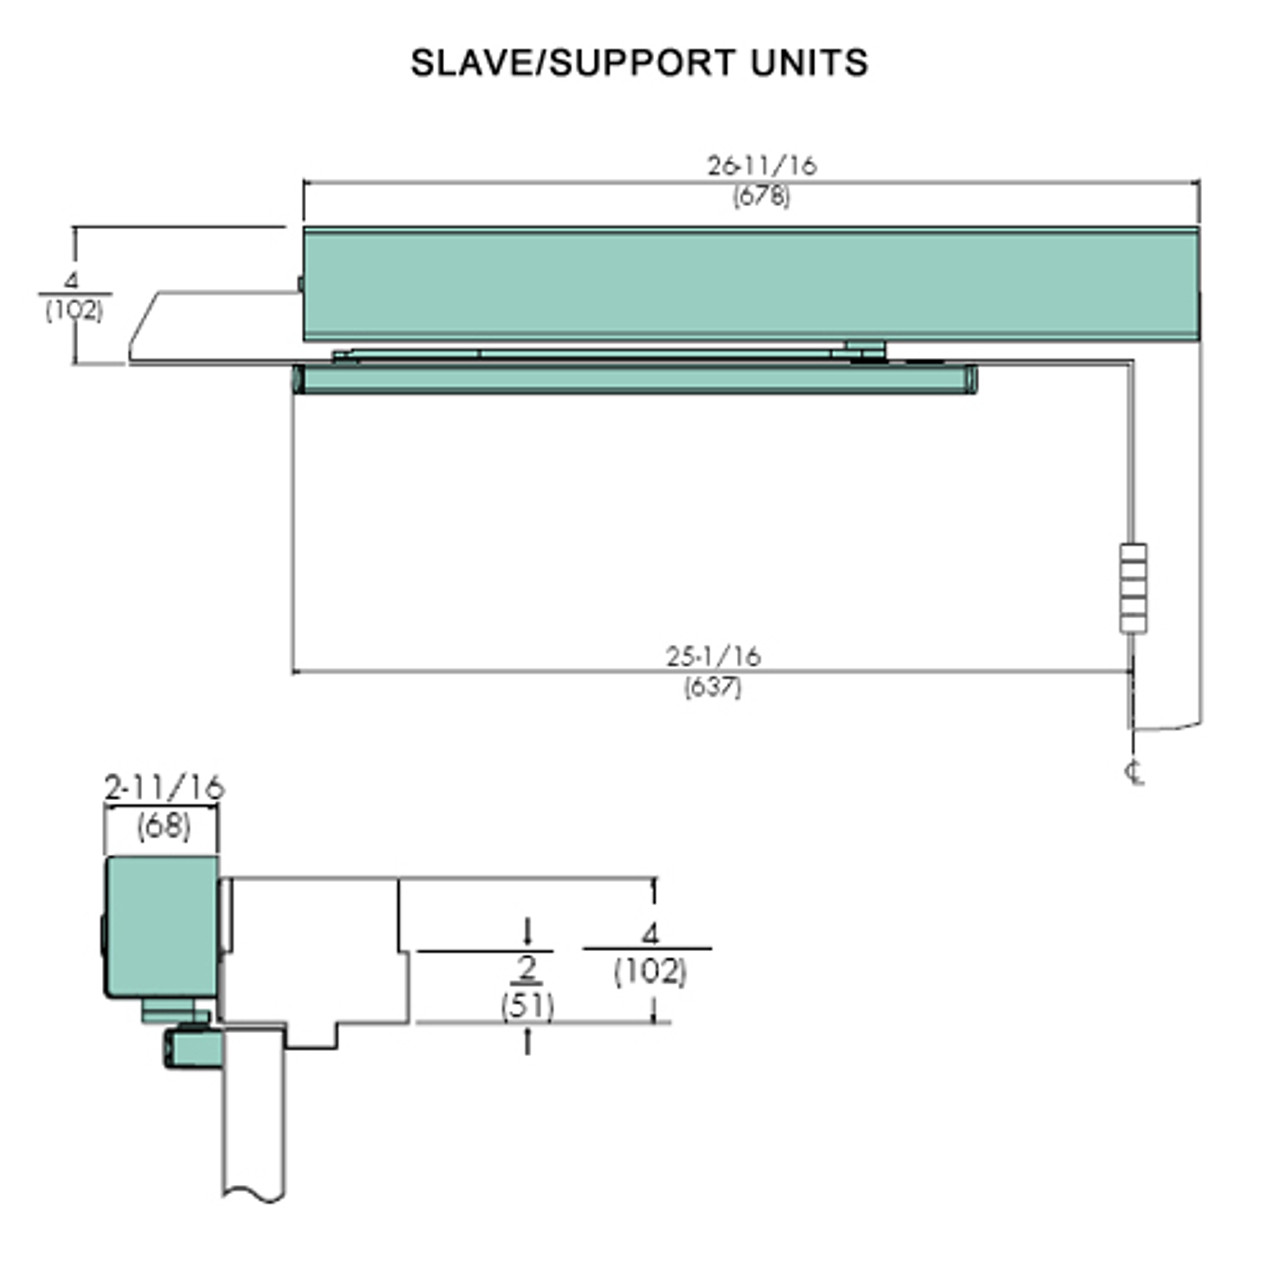 7214MPSO-LH-24VDC-690 Norton 7200 Series Electromechanical Closer and Holder with Rigid Arm Slide Track Slave/Support Unit in Statuary Bronze Finish